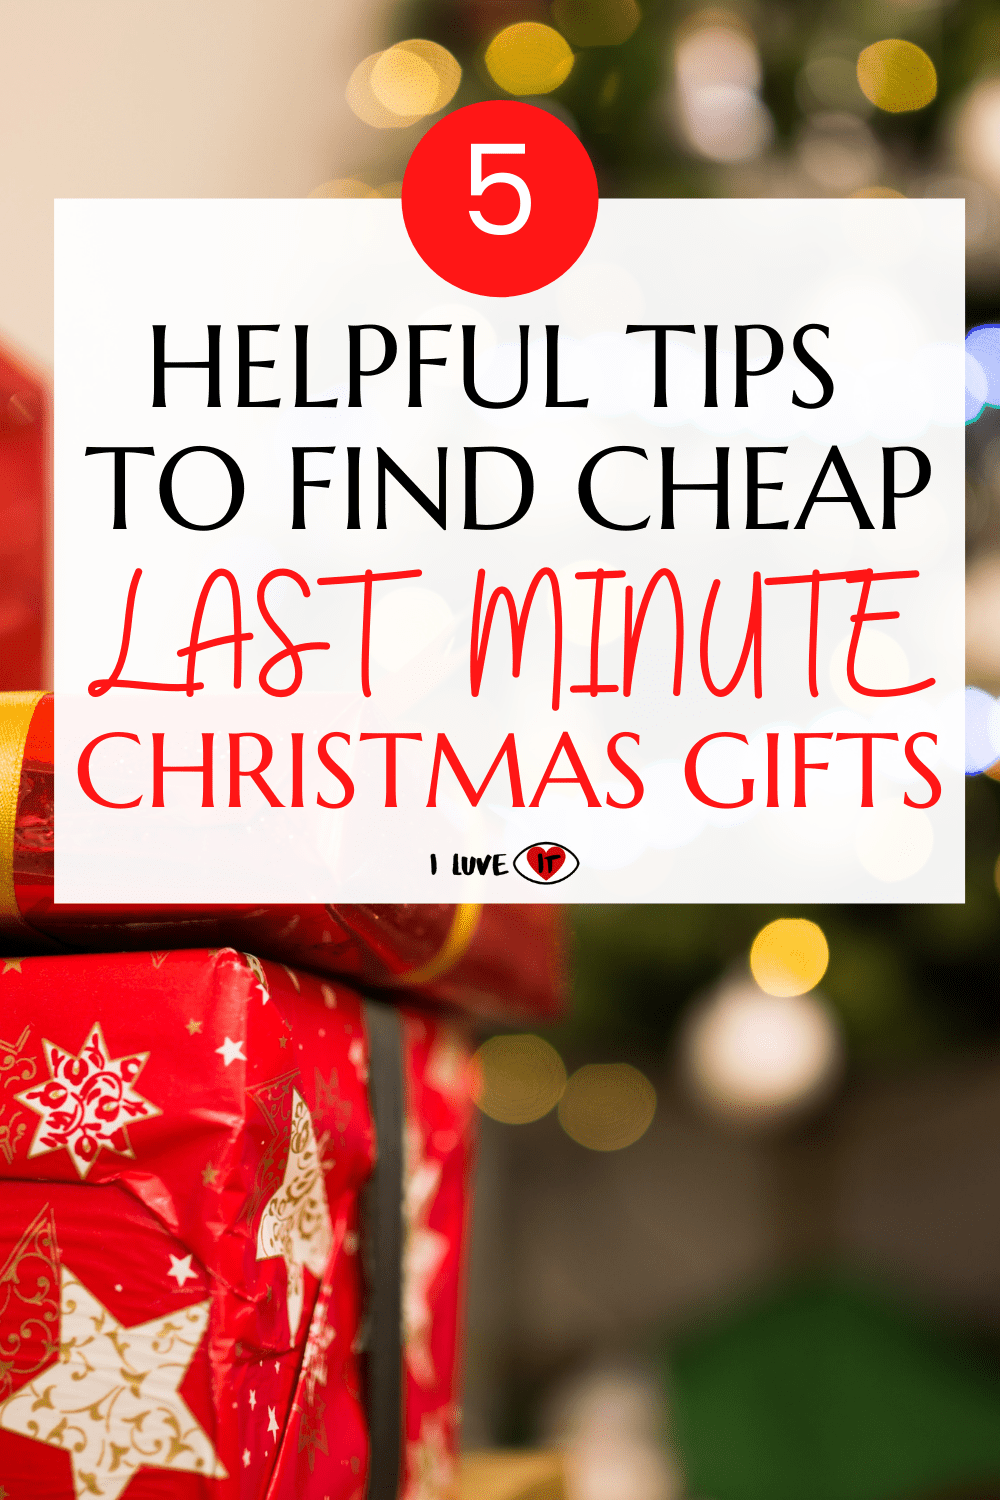 last-minute christmas gifts